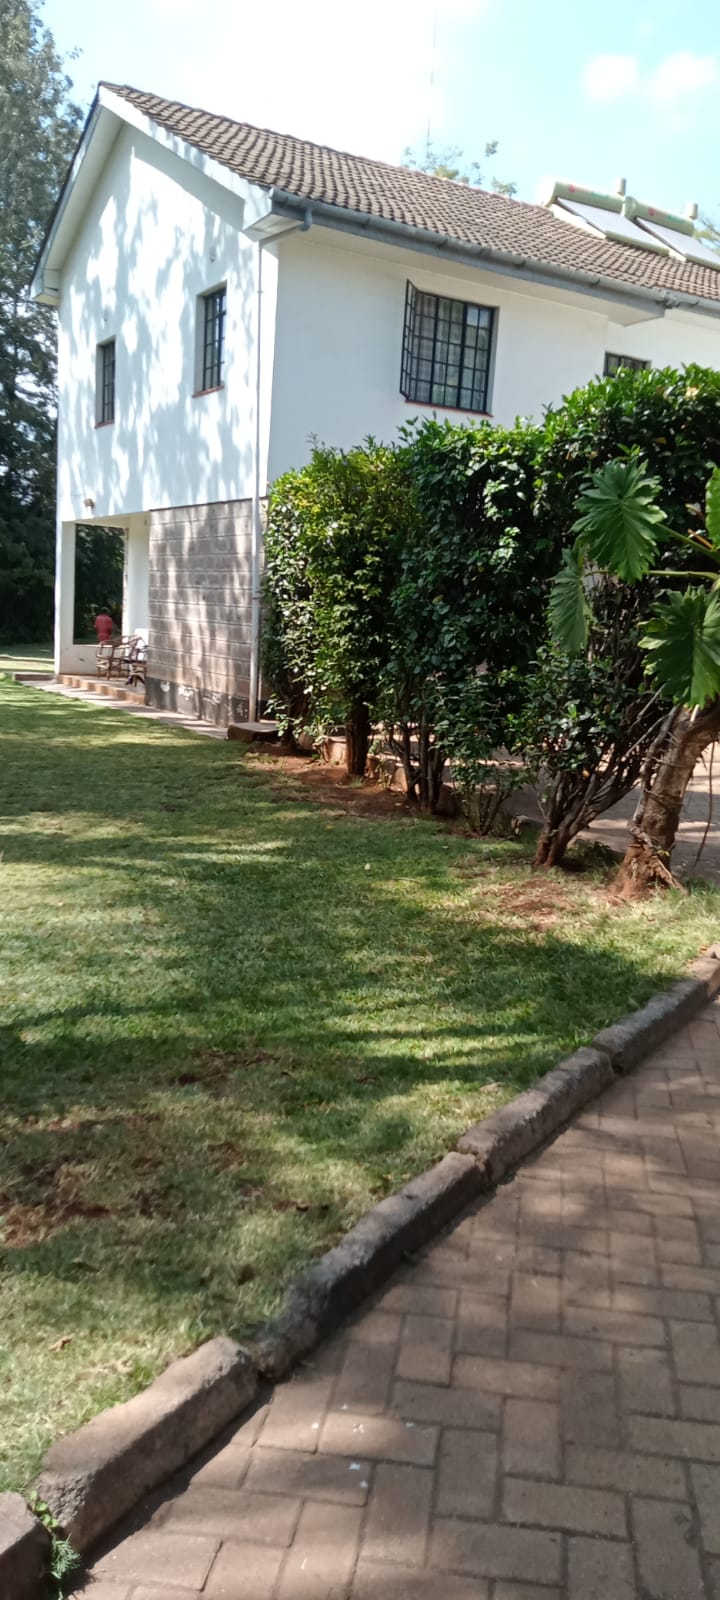 4 Bedroom Double Storey House to Let at Ksh600k Sitting on 34acres with Huge Family Room, Tv Room, Study Room, Terrace, Mature and Well-Kept Garden and more amenities (15)